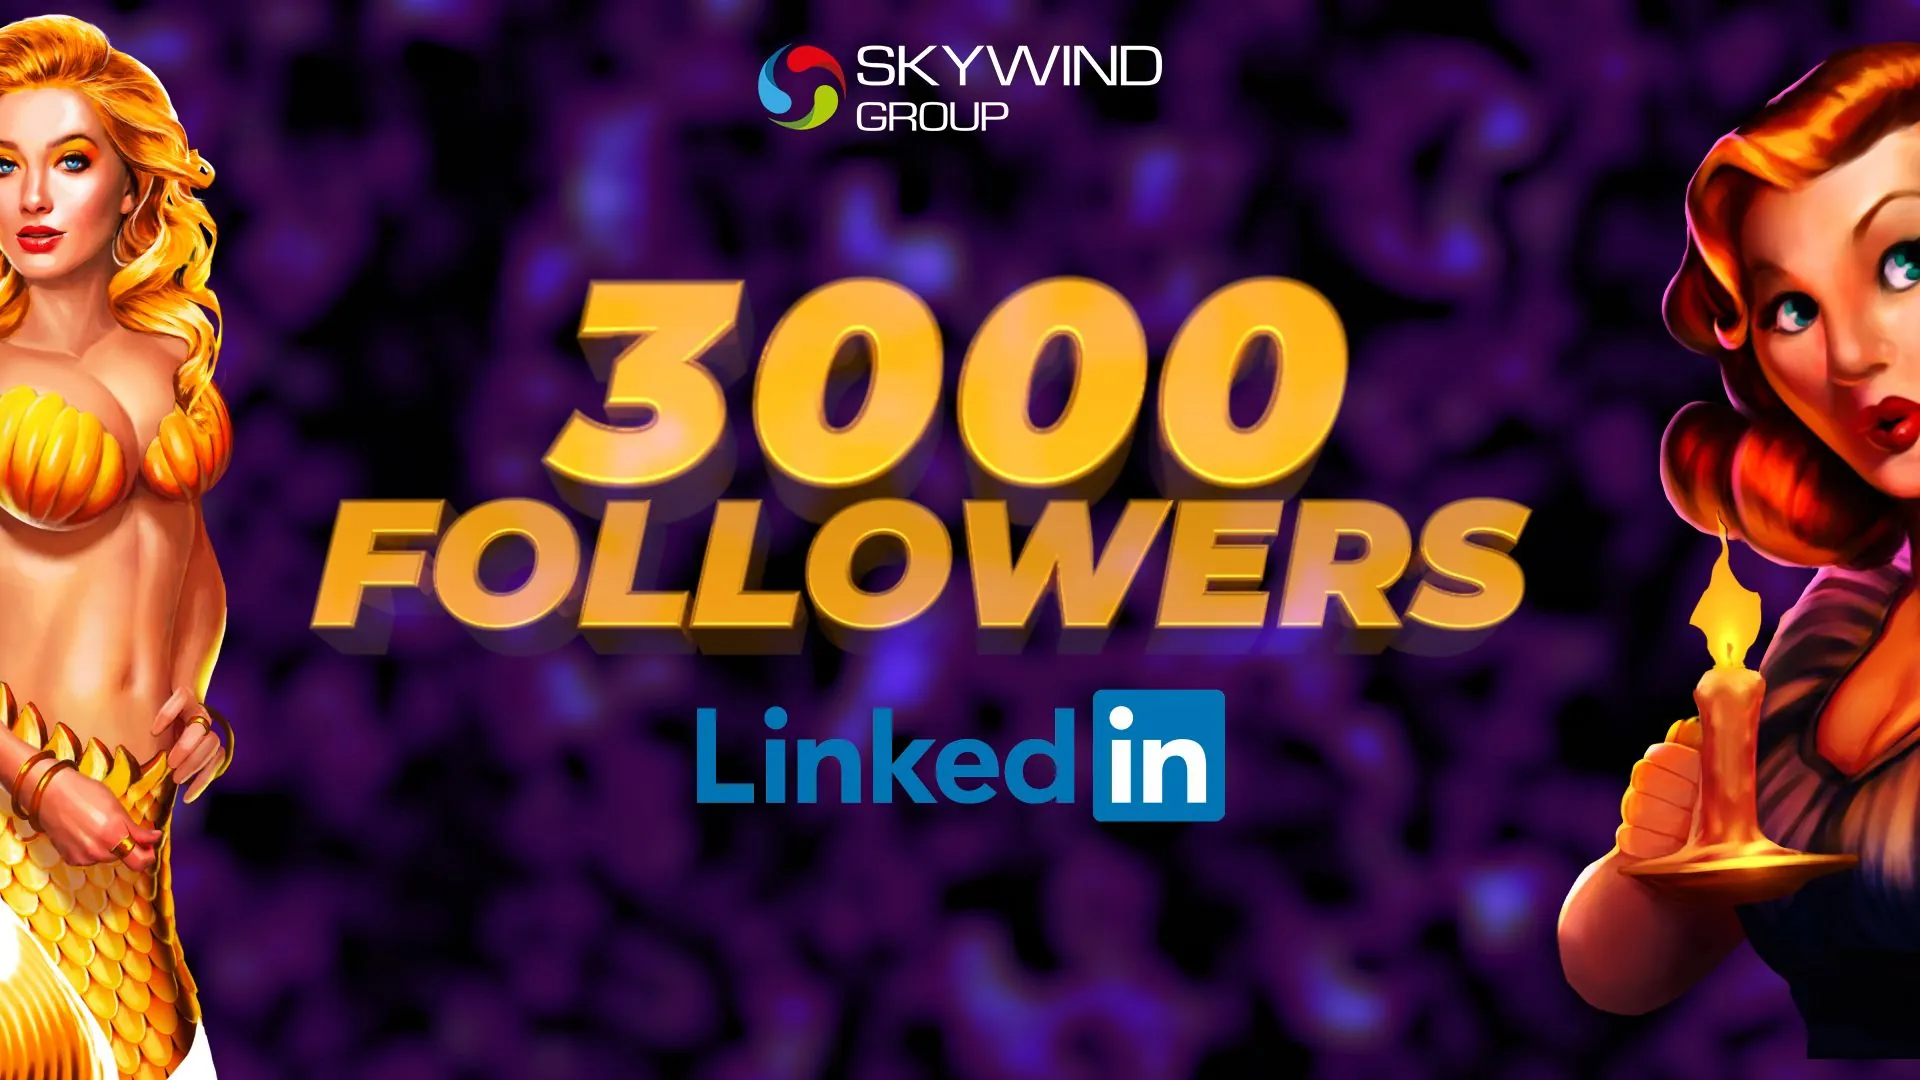 We reached 3000 Followers  on our Linkedin channel